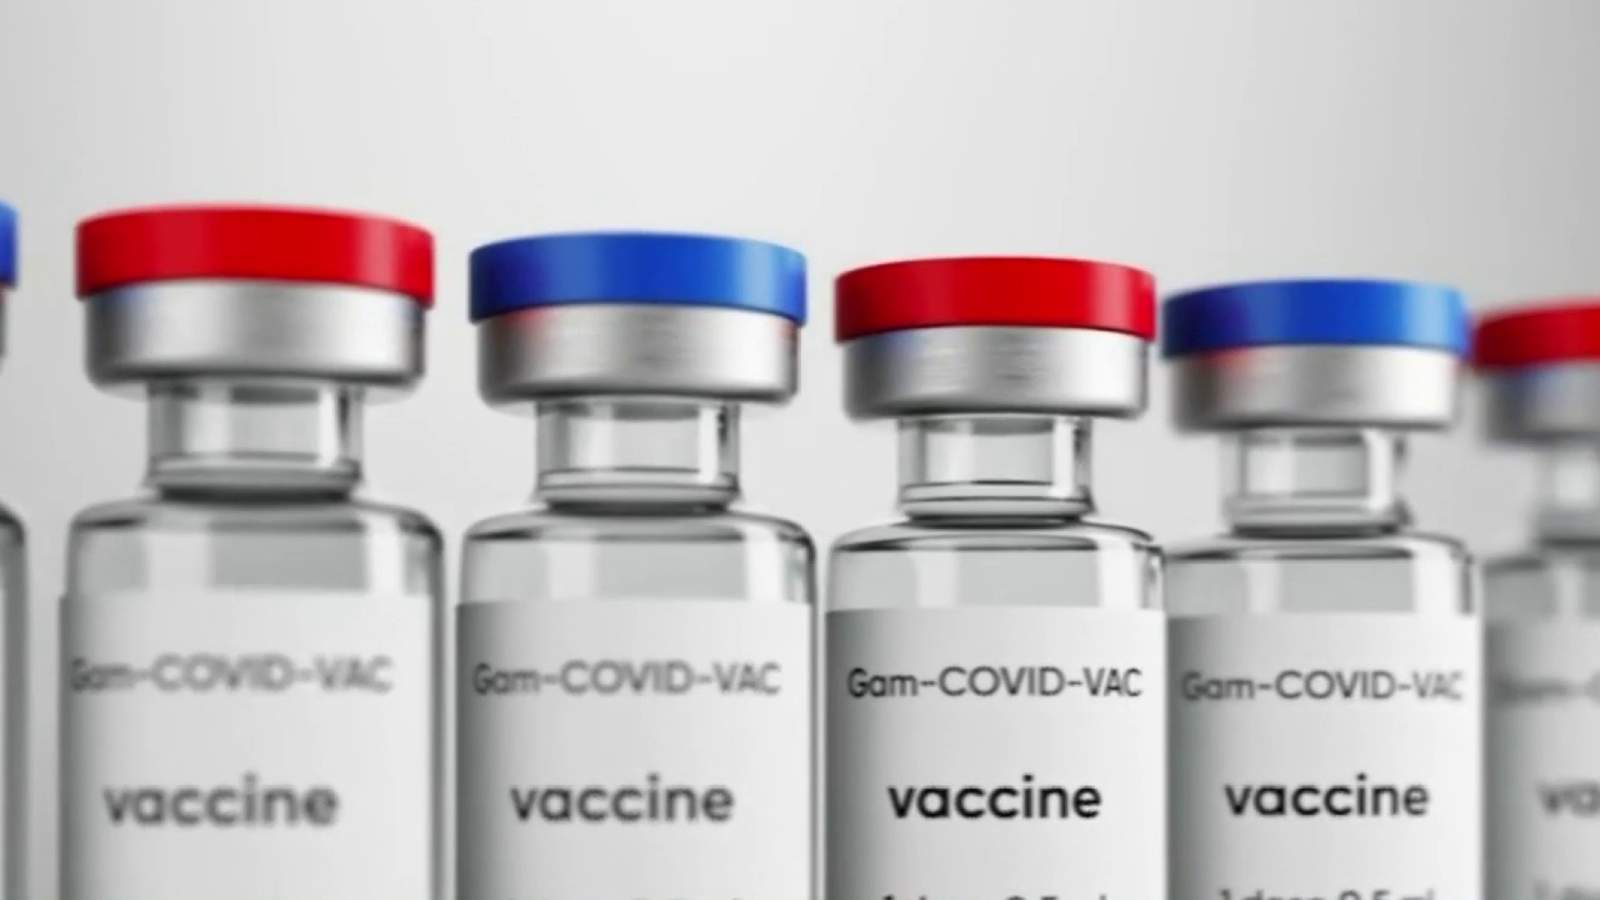 Homeland Security on alert for COVID vaccine scams: Here are red flags to watch for